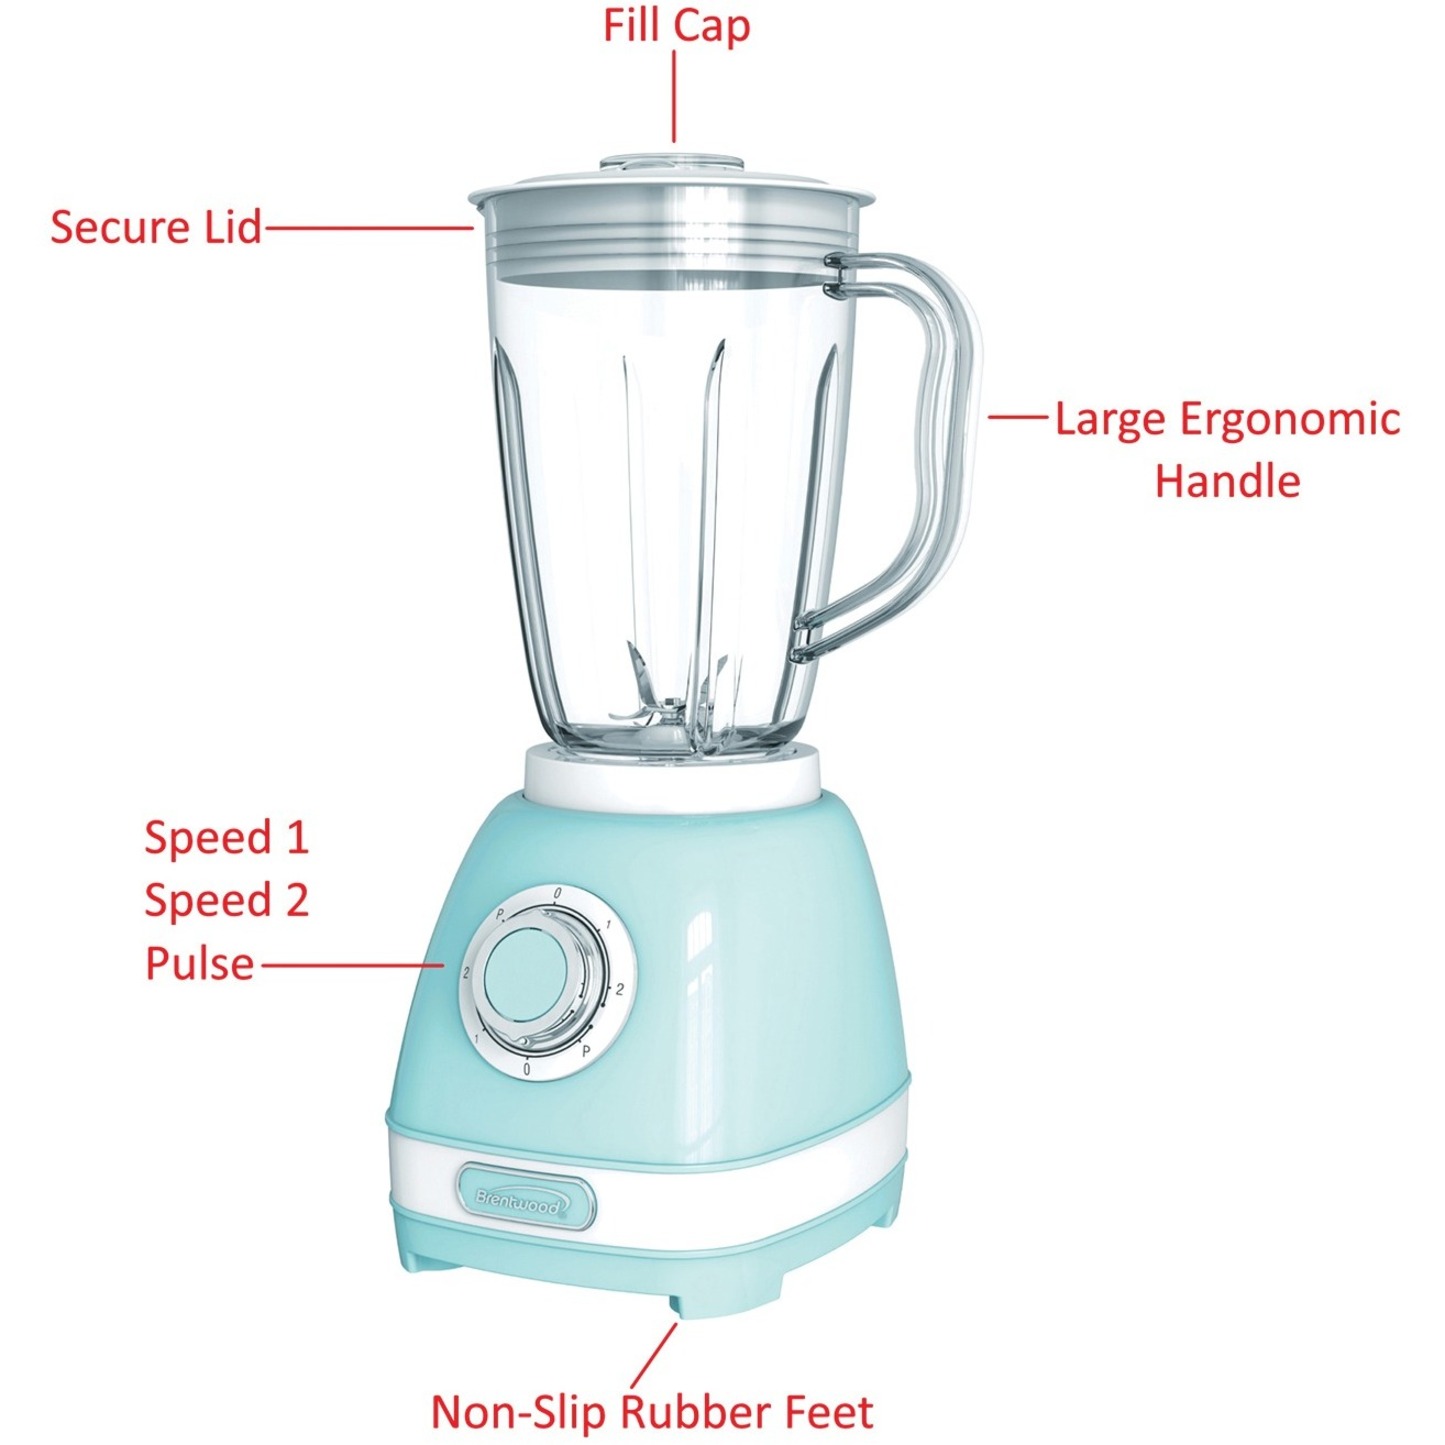 Brentwood Appliances Jb-330bl 2-speed Retro Blender With 50-Ounce Plastic Jar - image 2 of 7